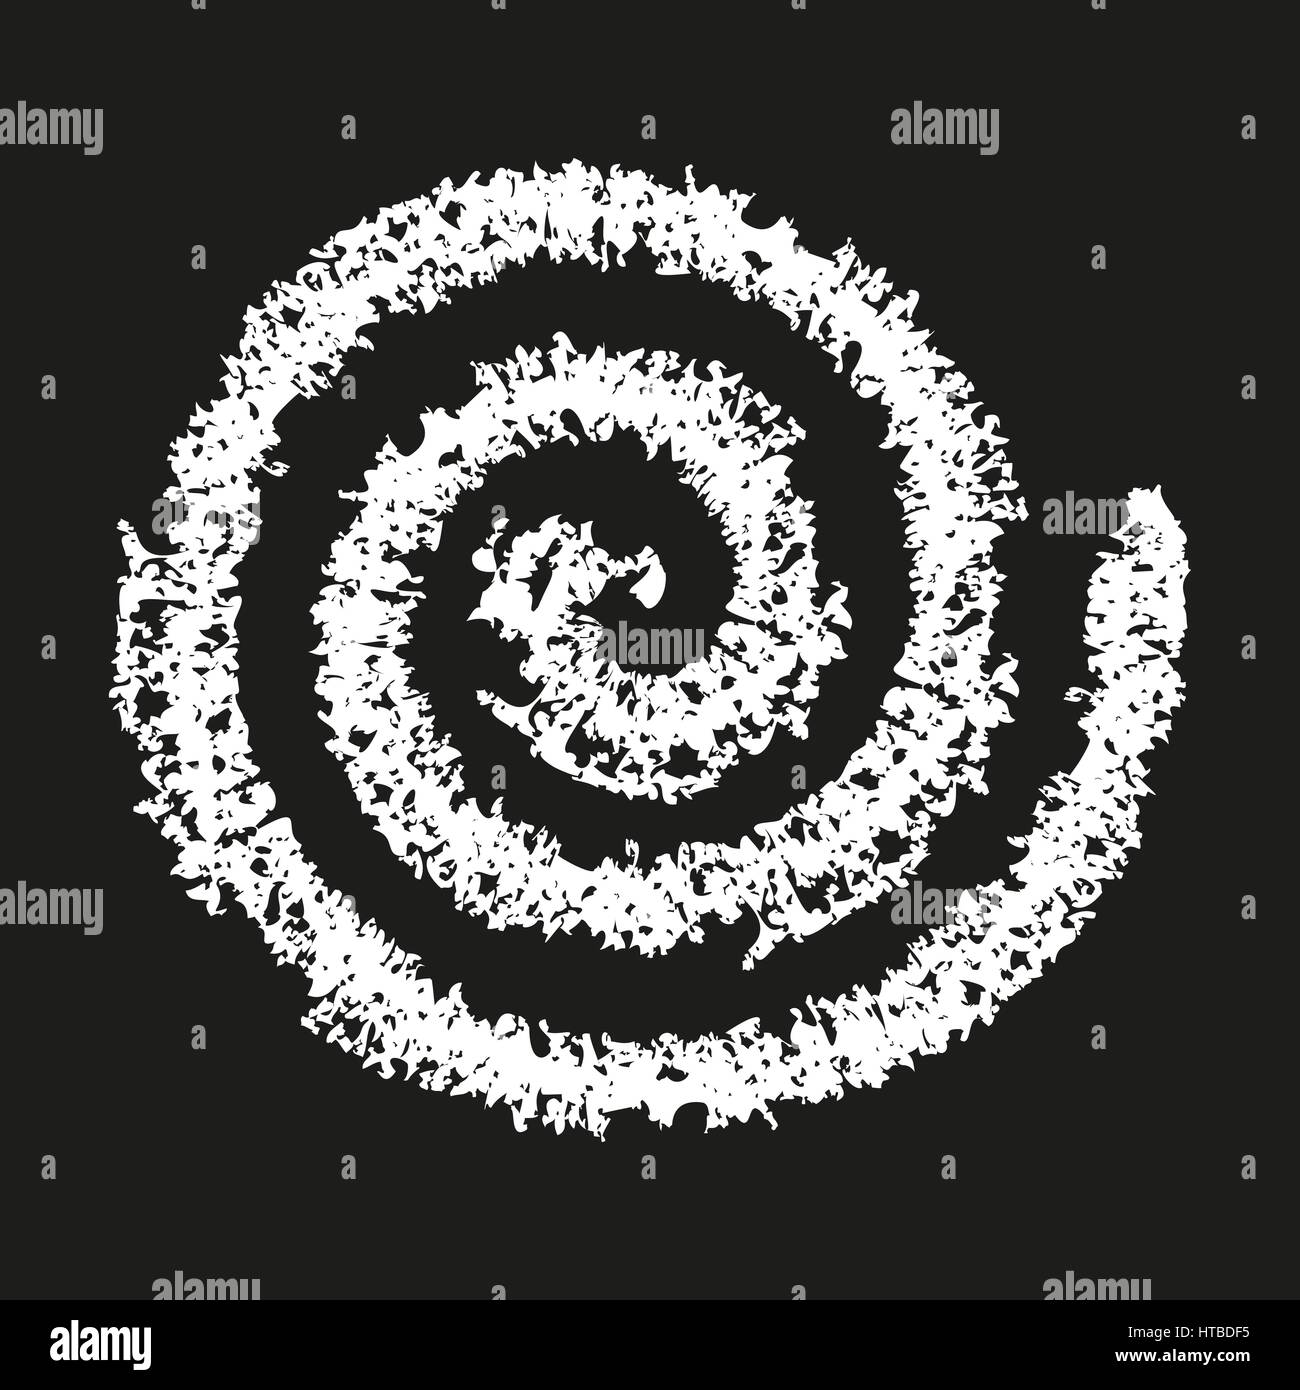 Spiral symbol hand painted crayon. Decorative graphic design element. Concentric curvy shape, swirling chalk swash on black background. Movement, endl Stock Vector